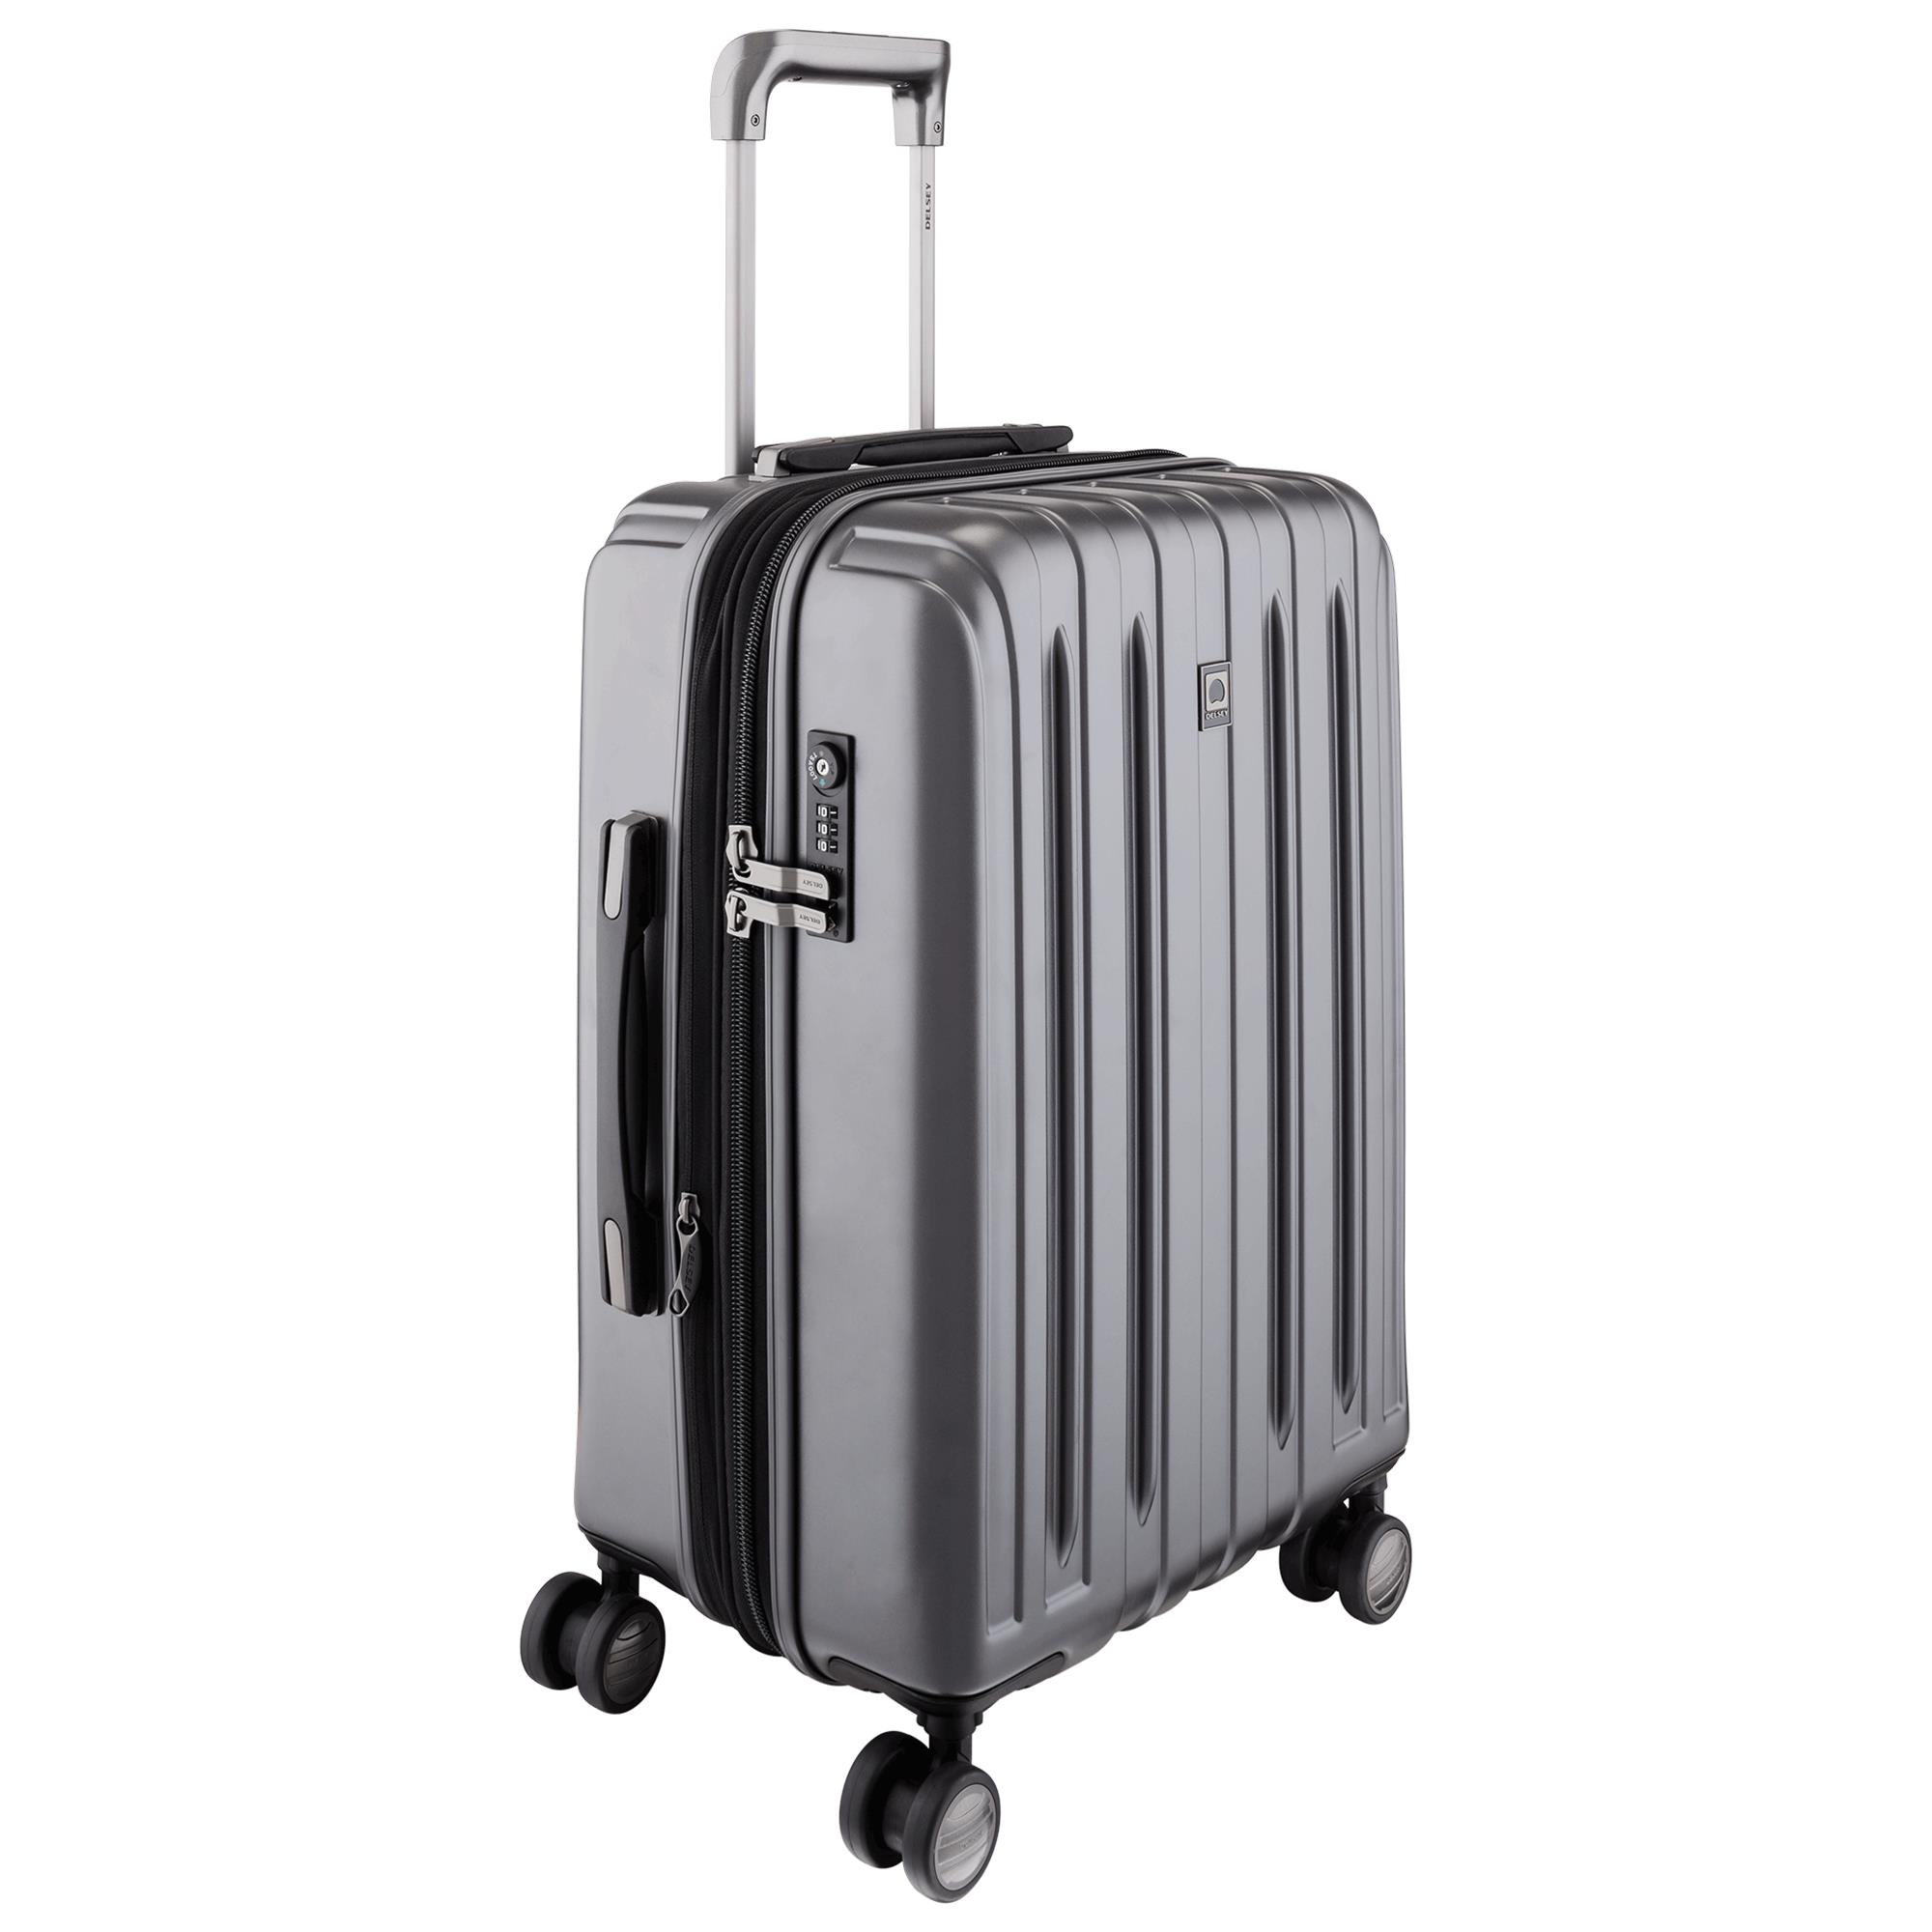 DELSEY Paris Titanium Expandable Carry On Spinner Rolling Luggage ...